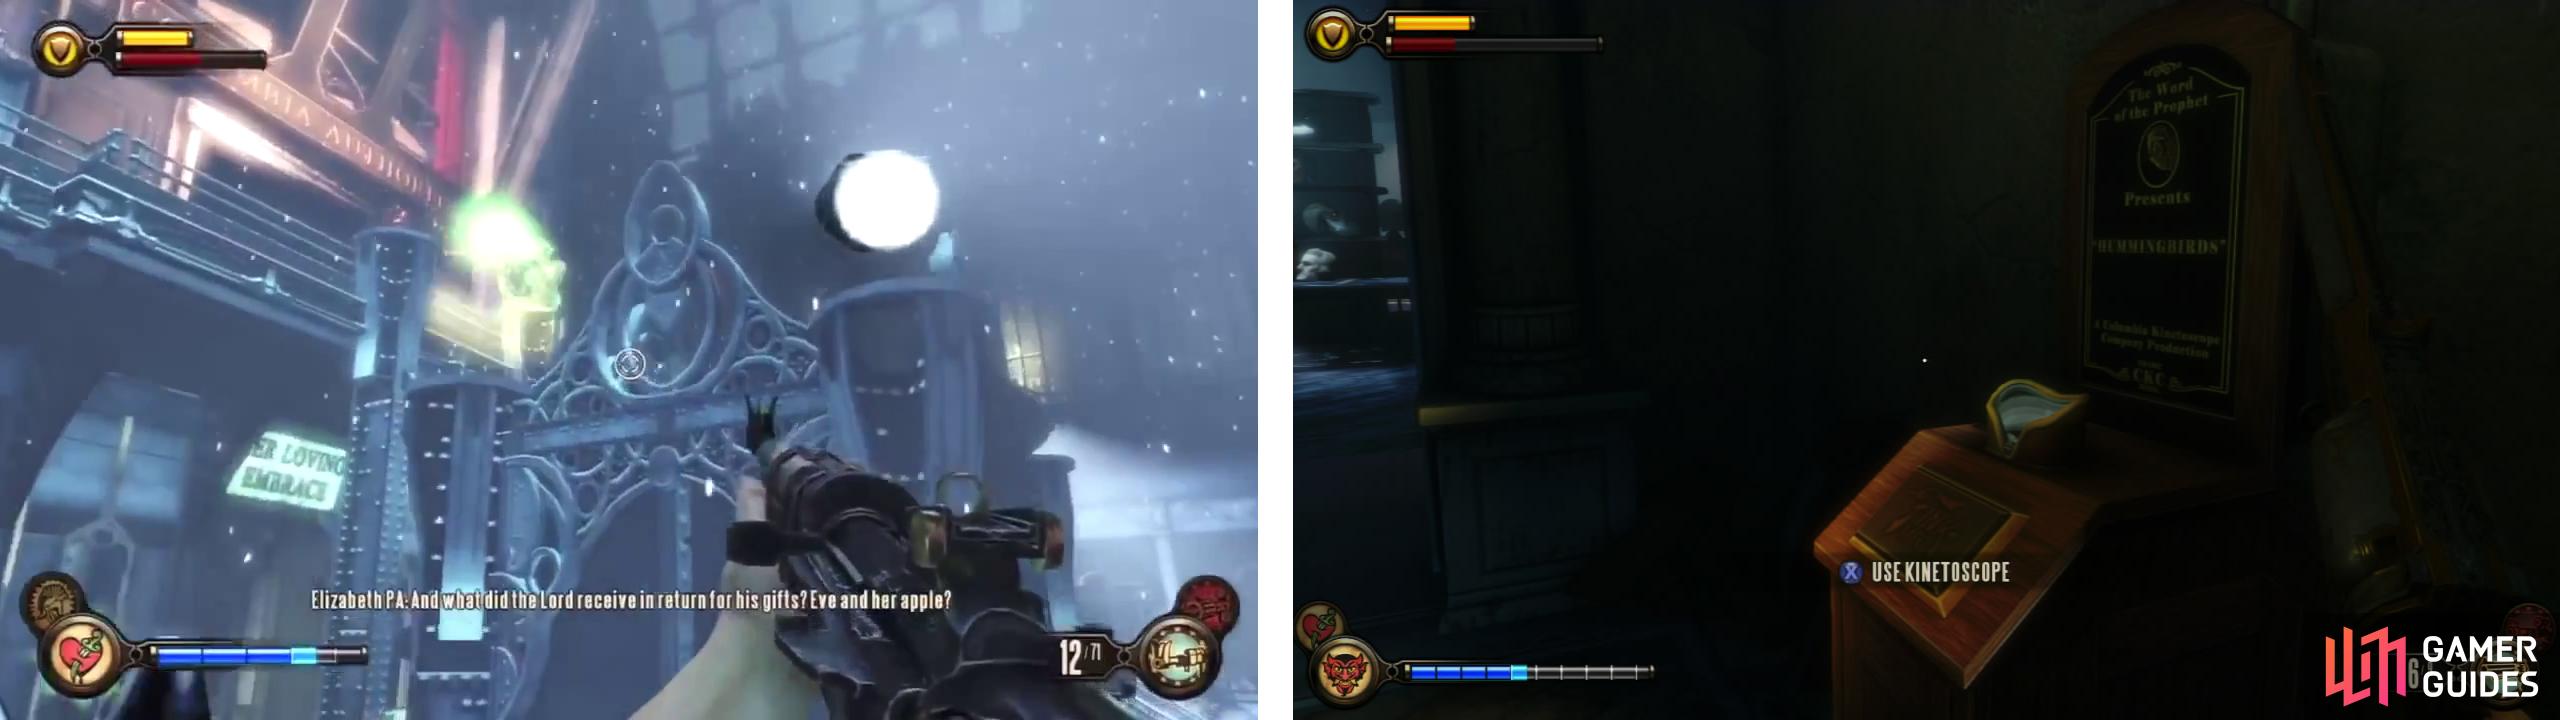 Destroy the turrets at the top of the stairs (left) and clear out any additional enemies. Climb the stairs and turn left to find a Kinetoscope (right).